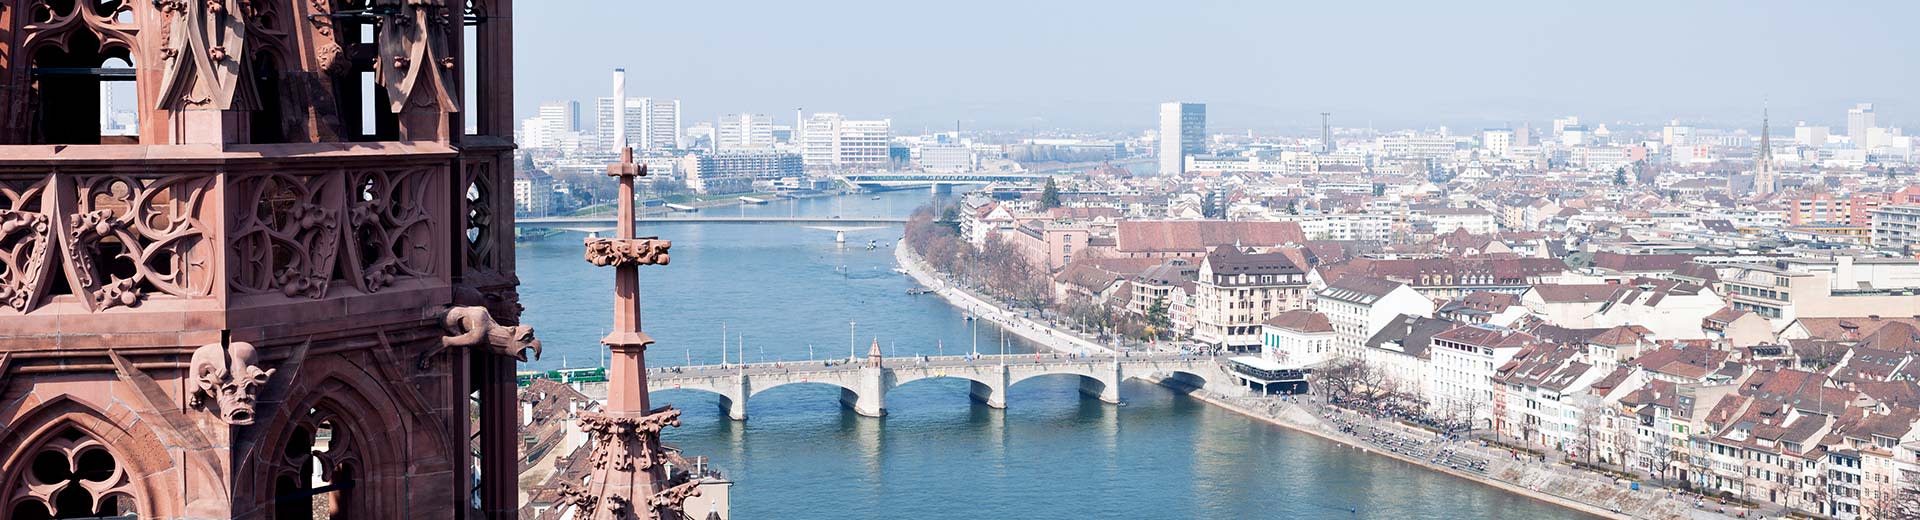 Birds eye view of the Rheine river in Basel on a sunny day, with a tower partially in view on the left and three bridges that cross the river.